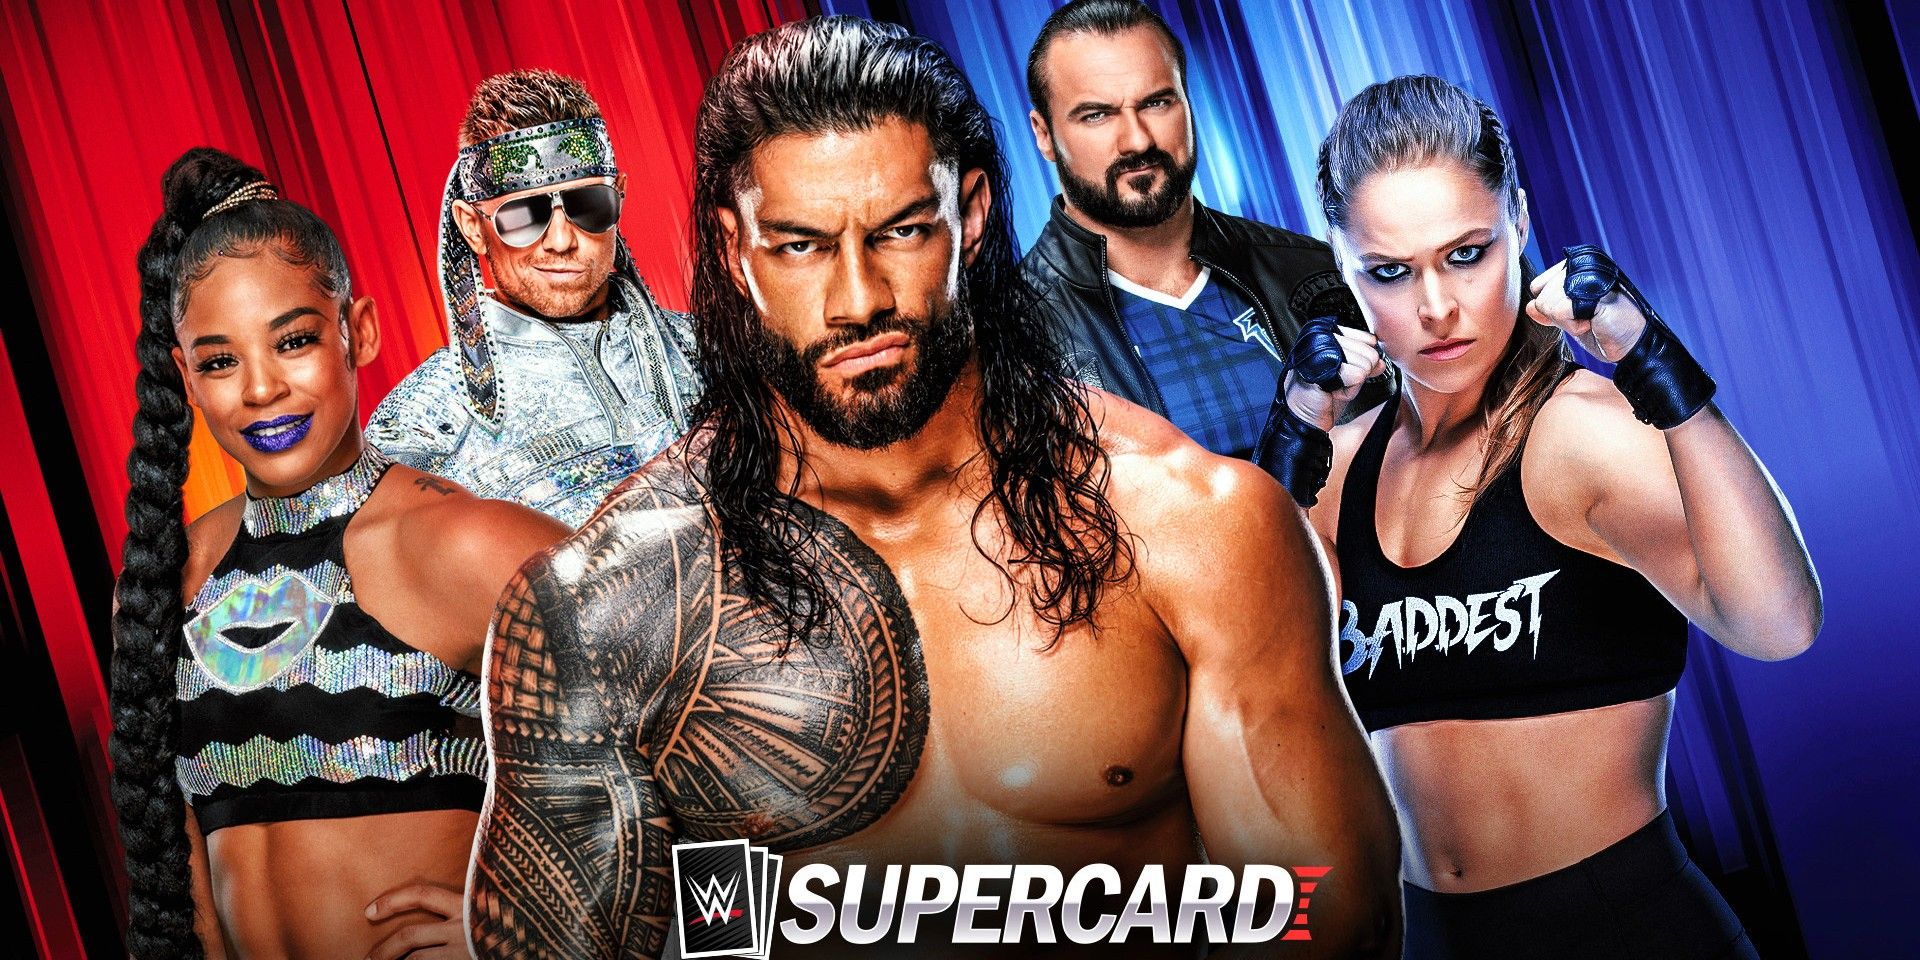 WWE Supercard Key Art showing 5 wrestling stars and the game's logo.